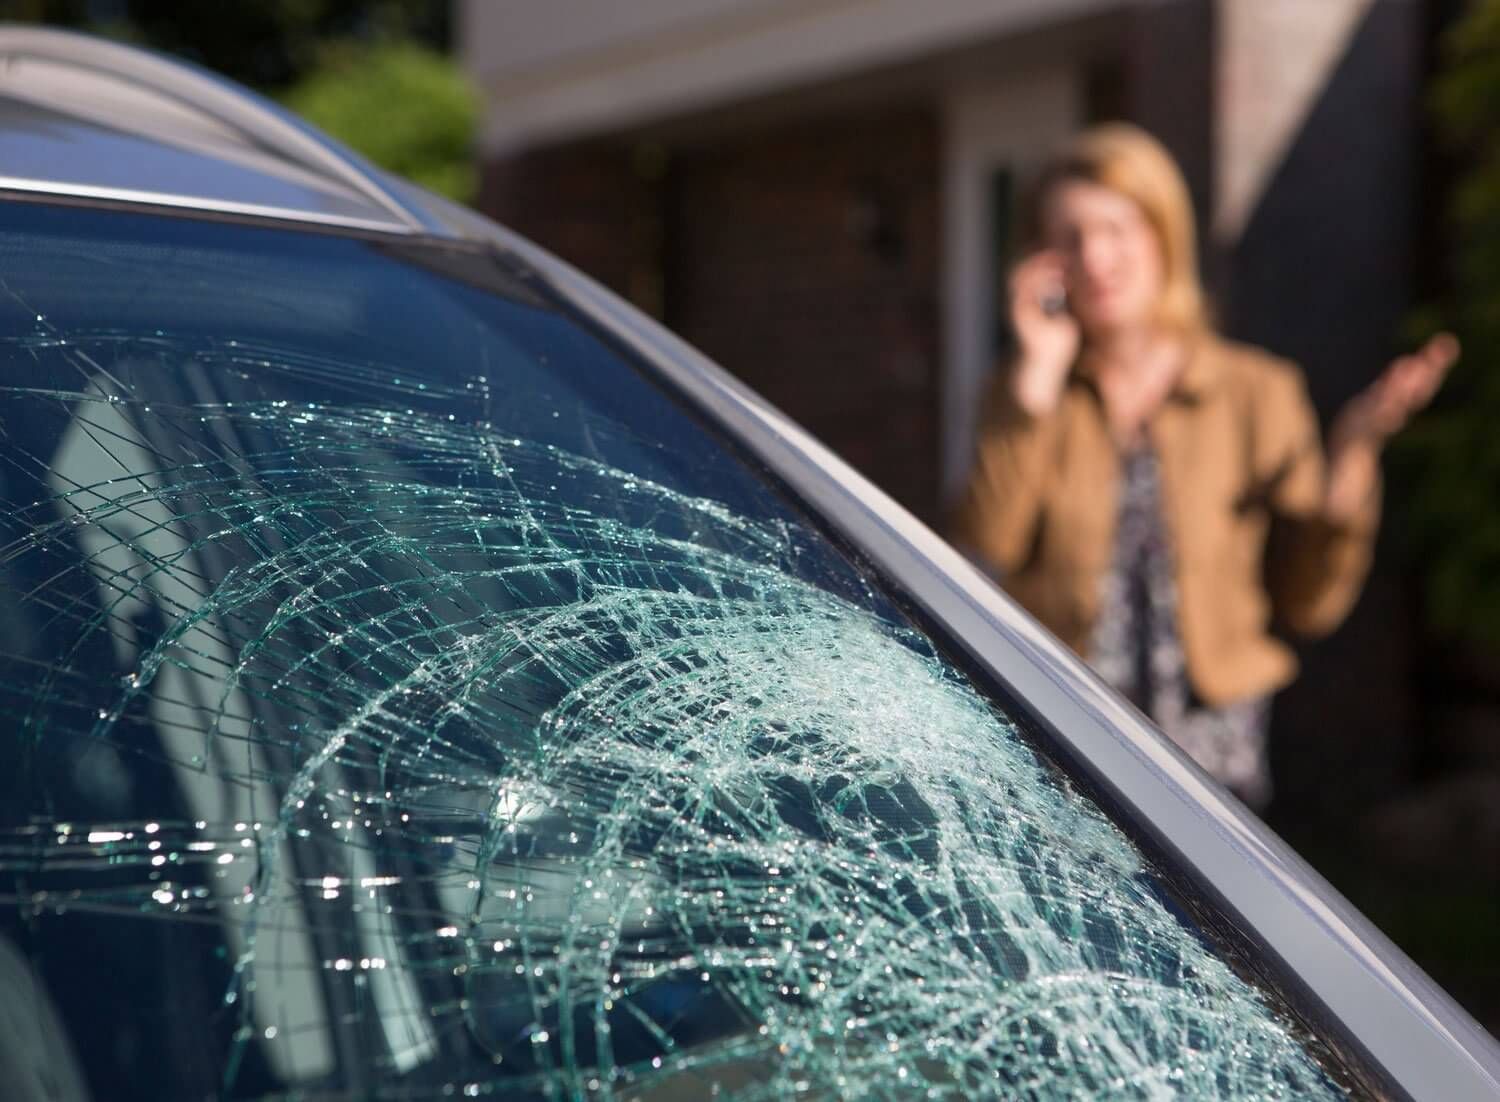 A woman in need of auto glass replacement in Mullica Hill, NJ